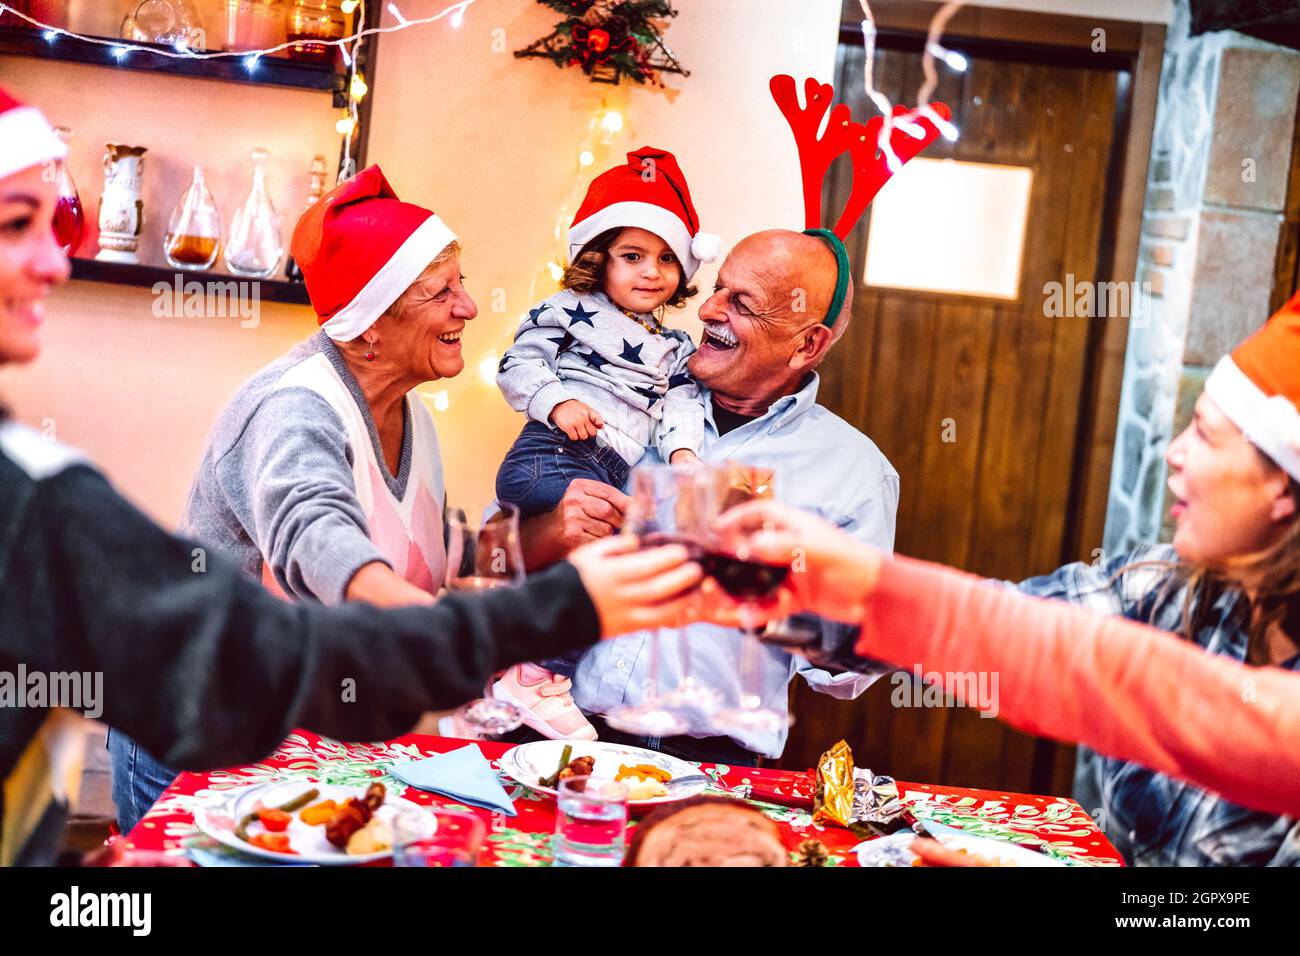 Multi generation family having fun at Christmas supper party - Winter holiday x mas concept with grandparent and daughter eating together opening gift Stock Photo